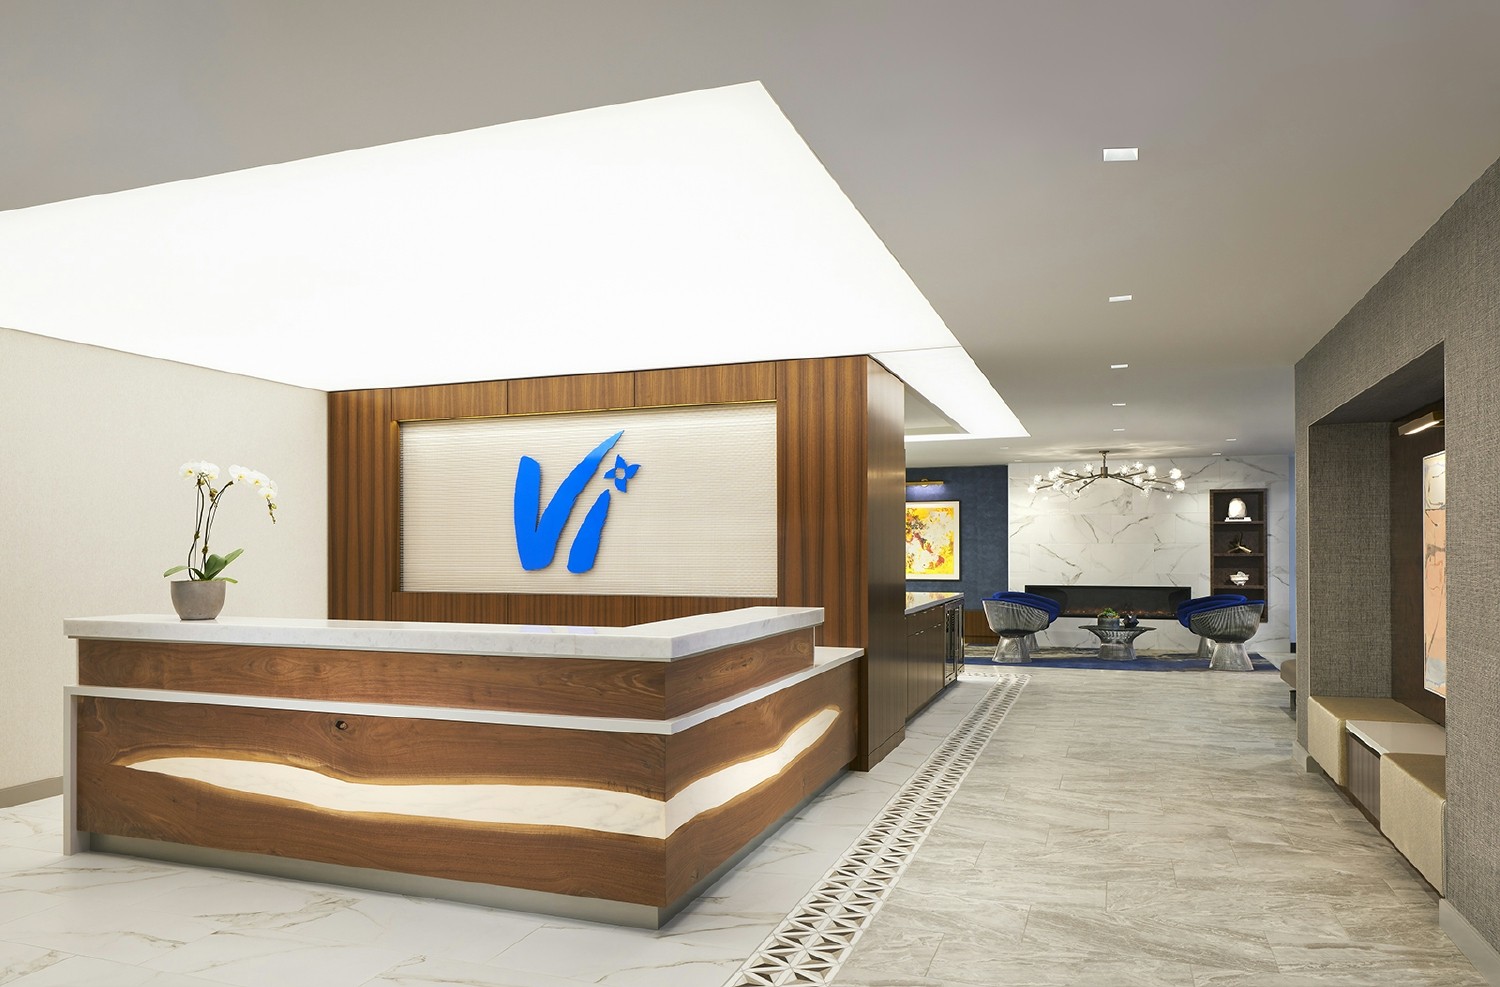 Vi's 10 luxurious communities provide residents a great place to live, and team members a very desirable place to work.